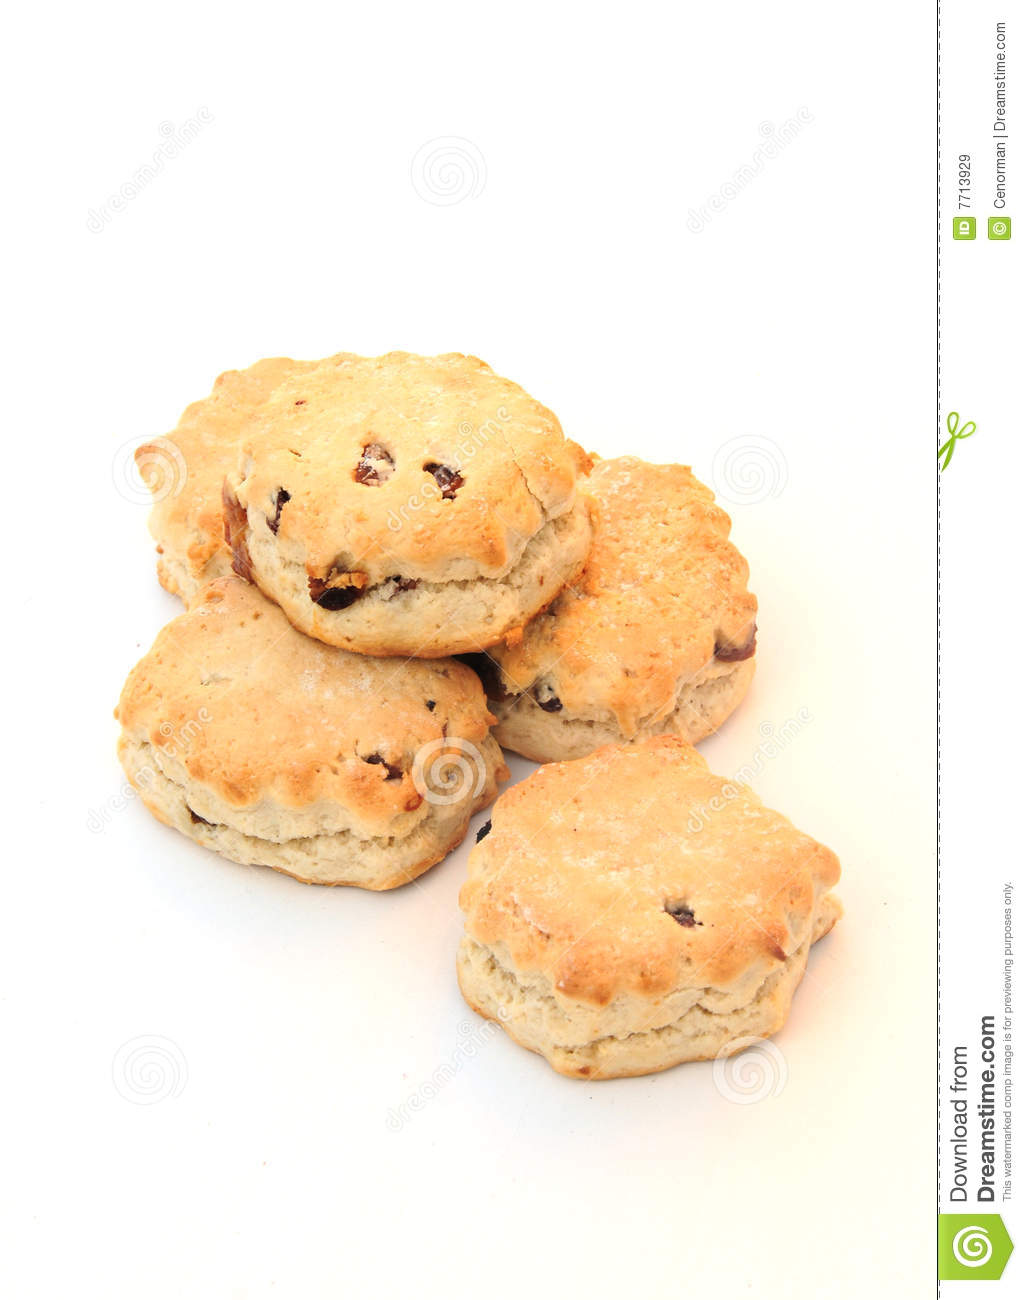 Scones Royalty Free Stock Images   Image  7713929